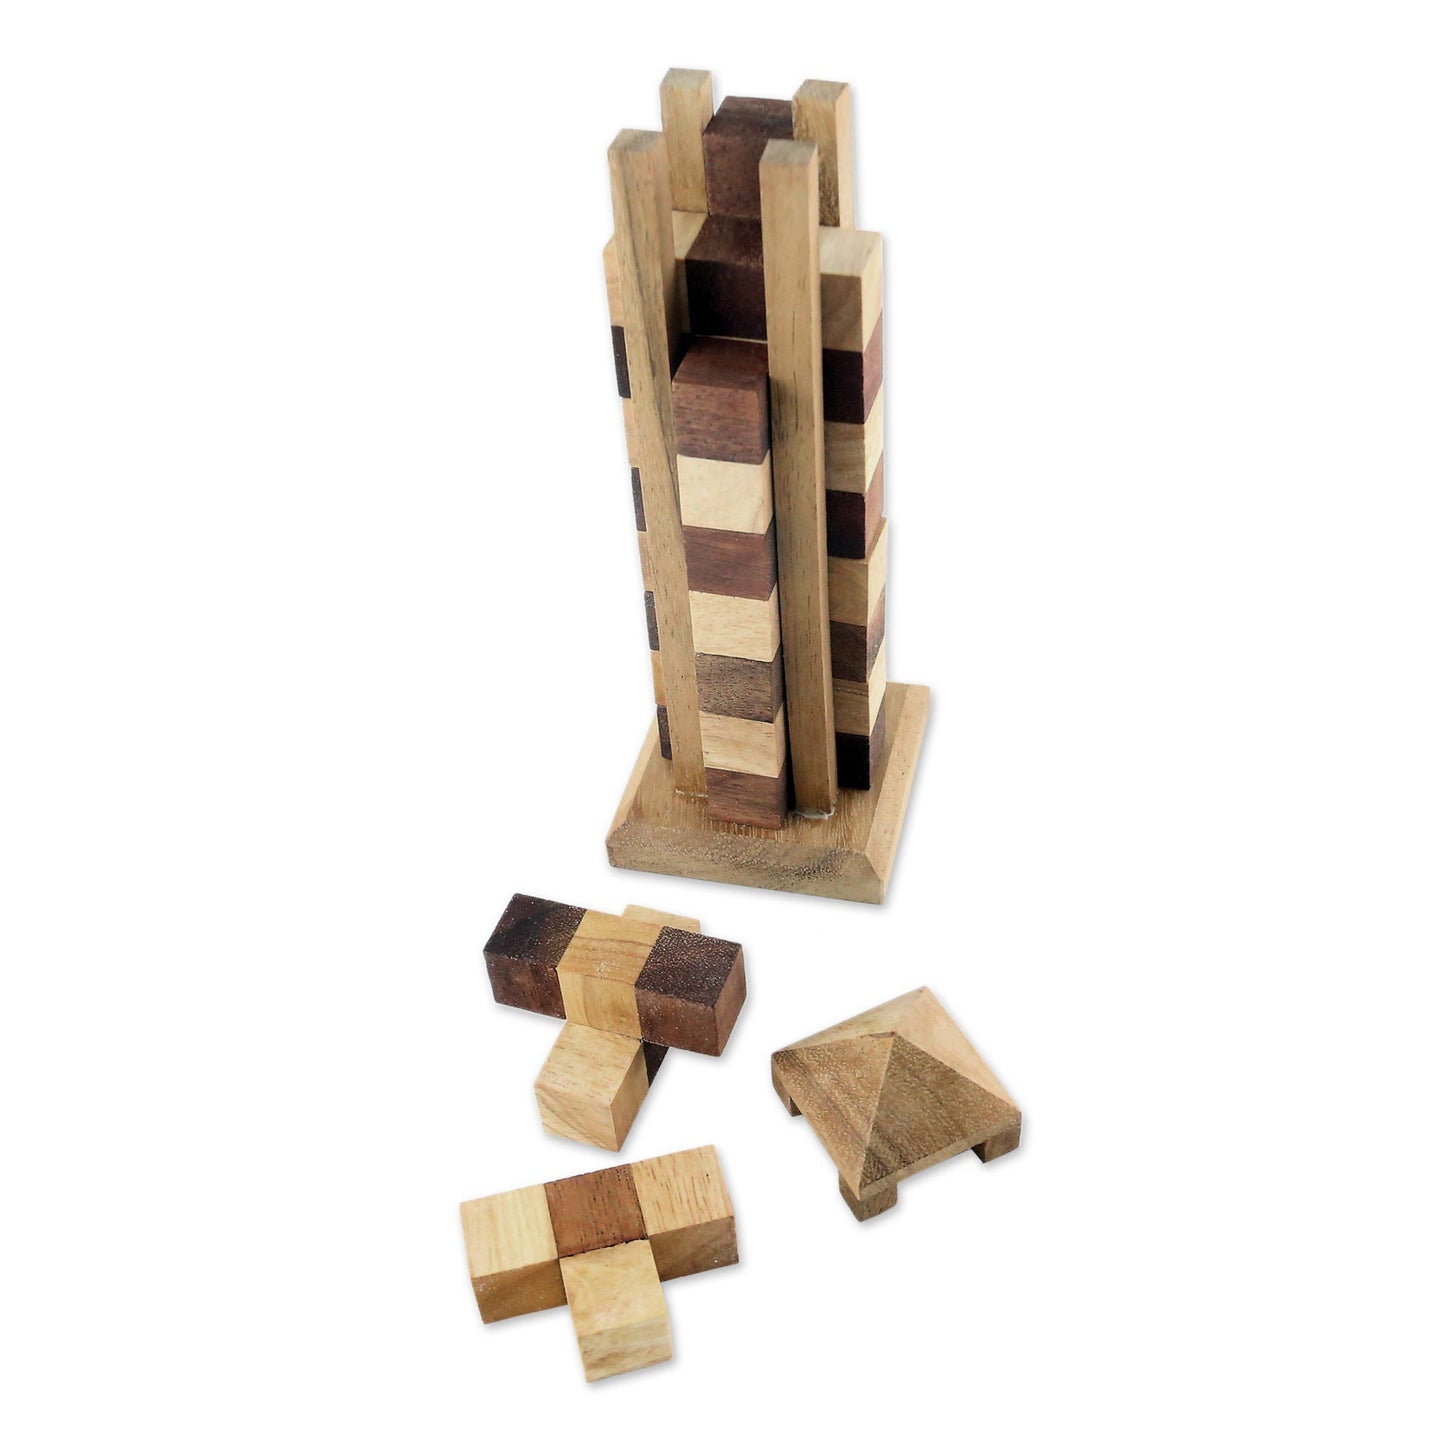 Babylon Tower Hand Made Wood Tower Puzzle Game from Thailand